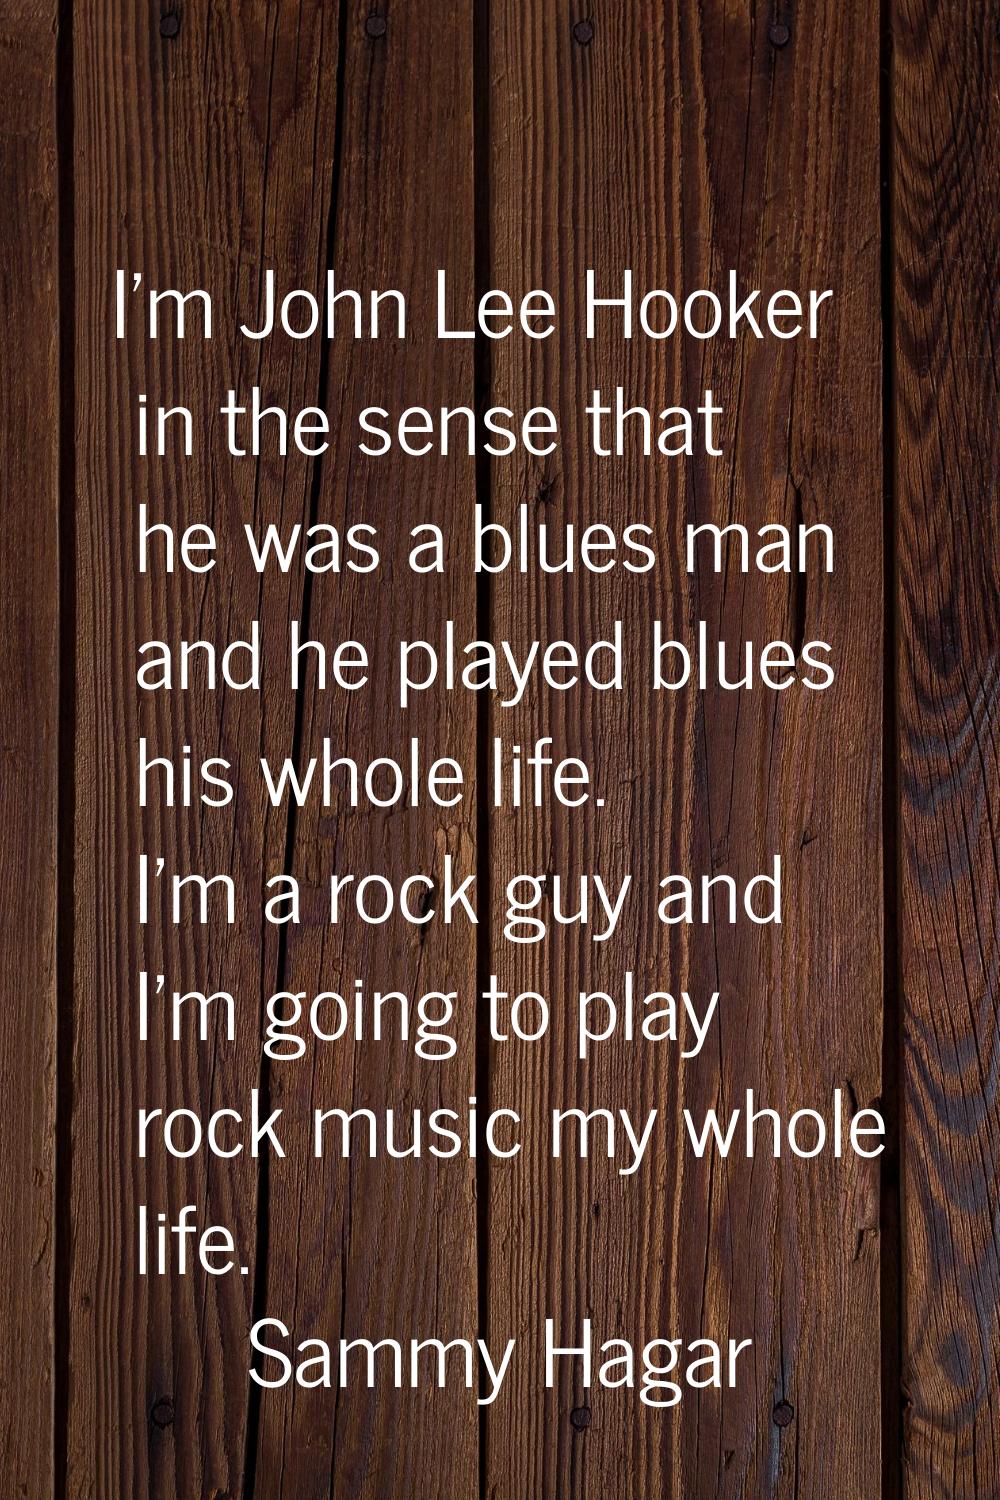 I'm John Lee Hooker in the sense that he was a blues man and he played blues his whole life. I'm a 